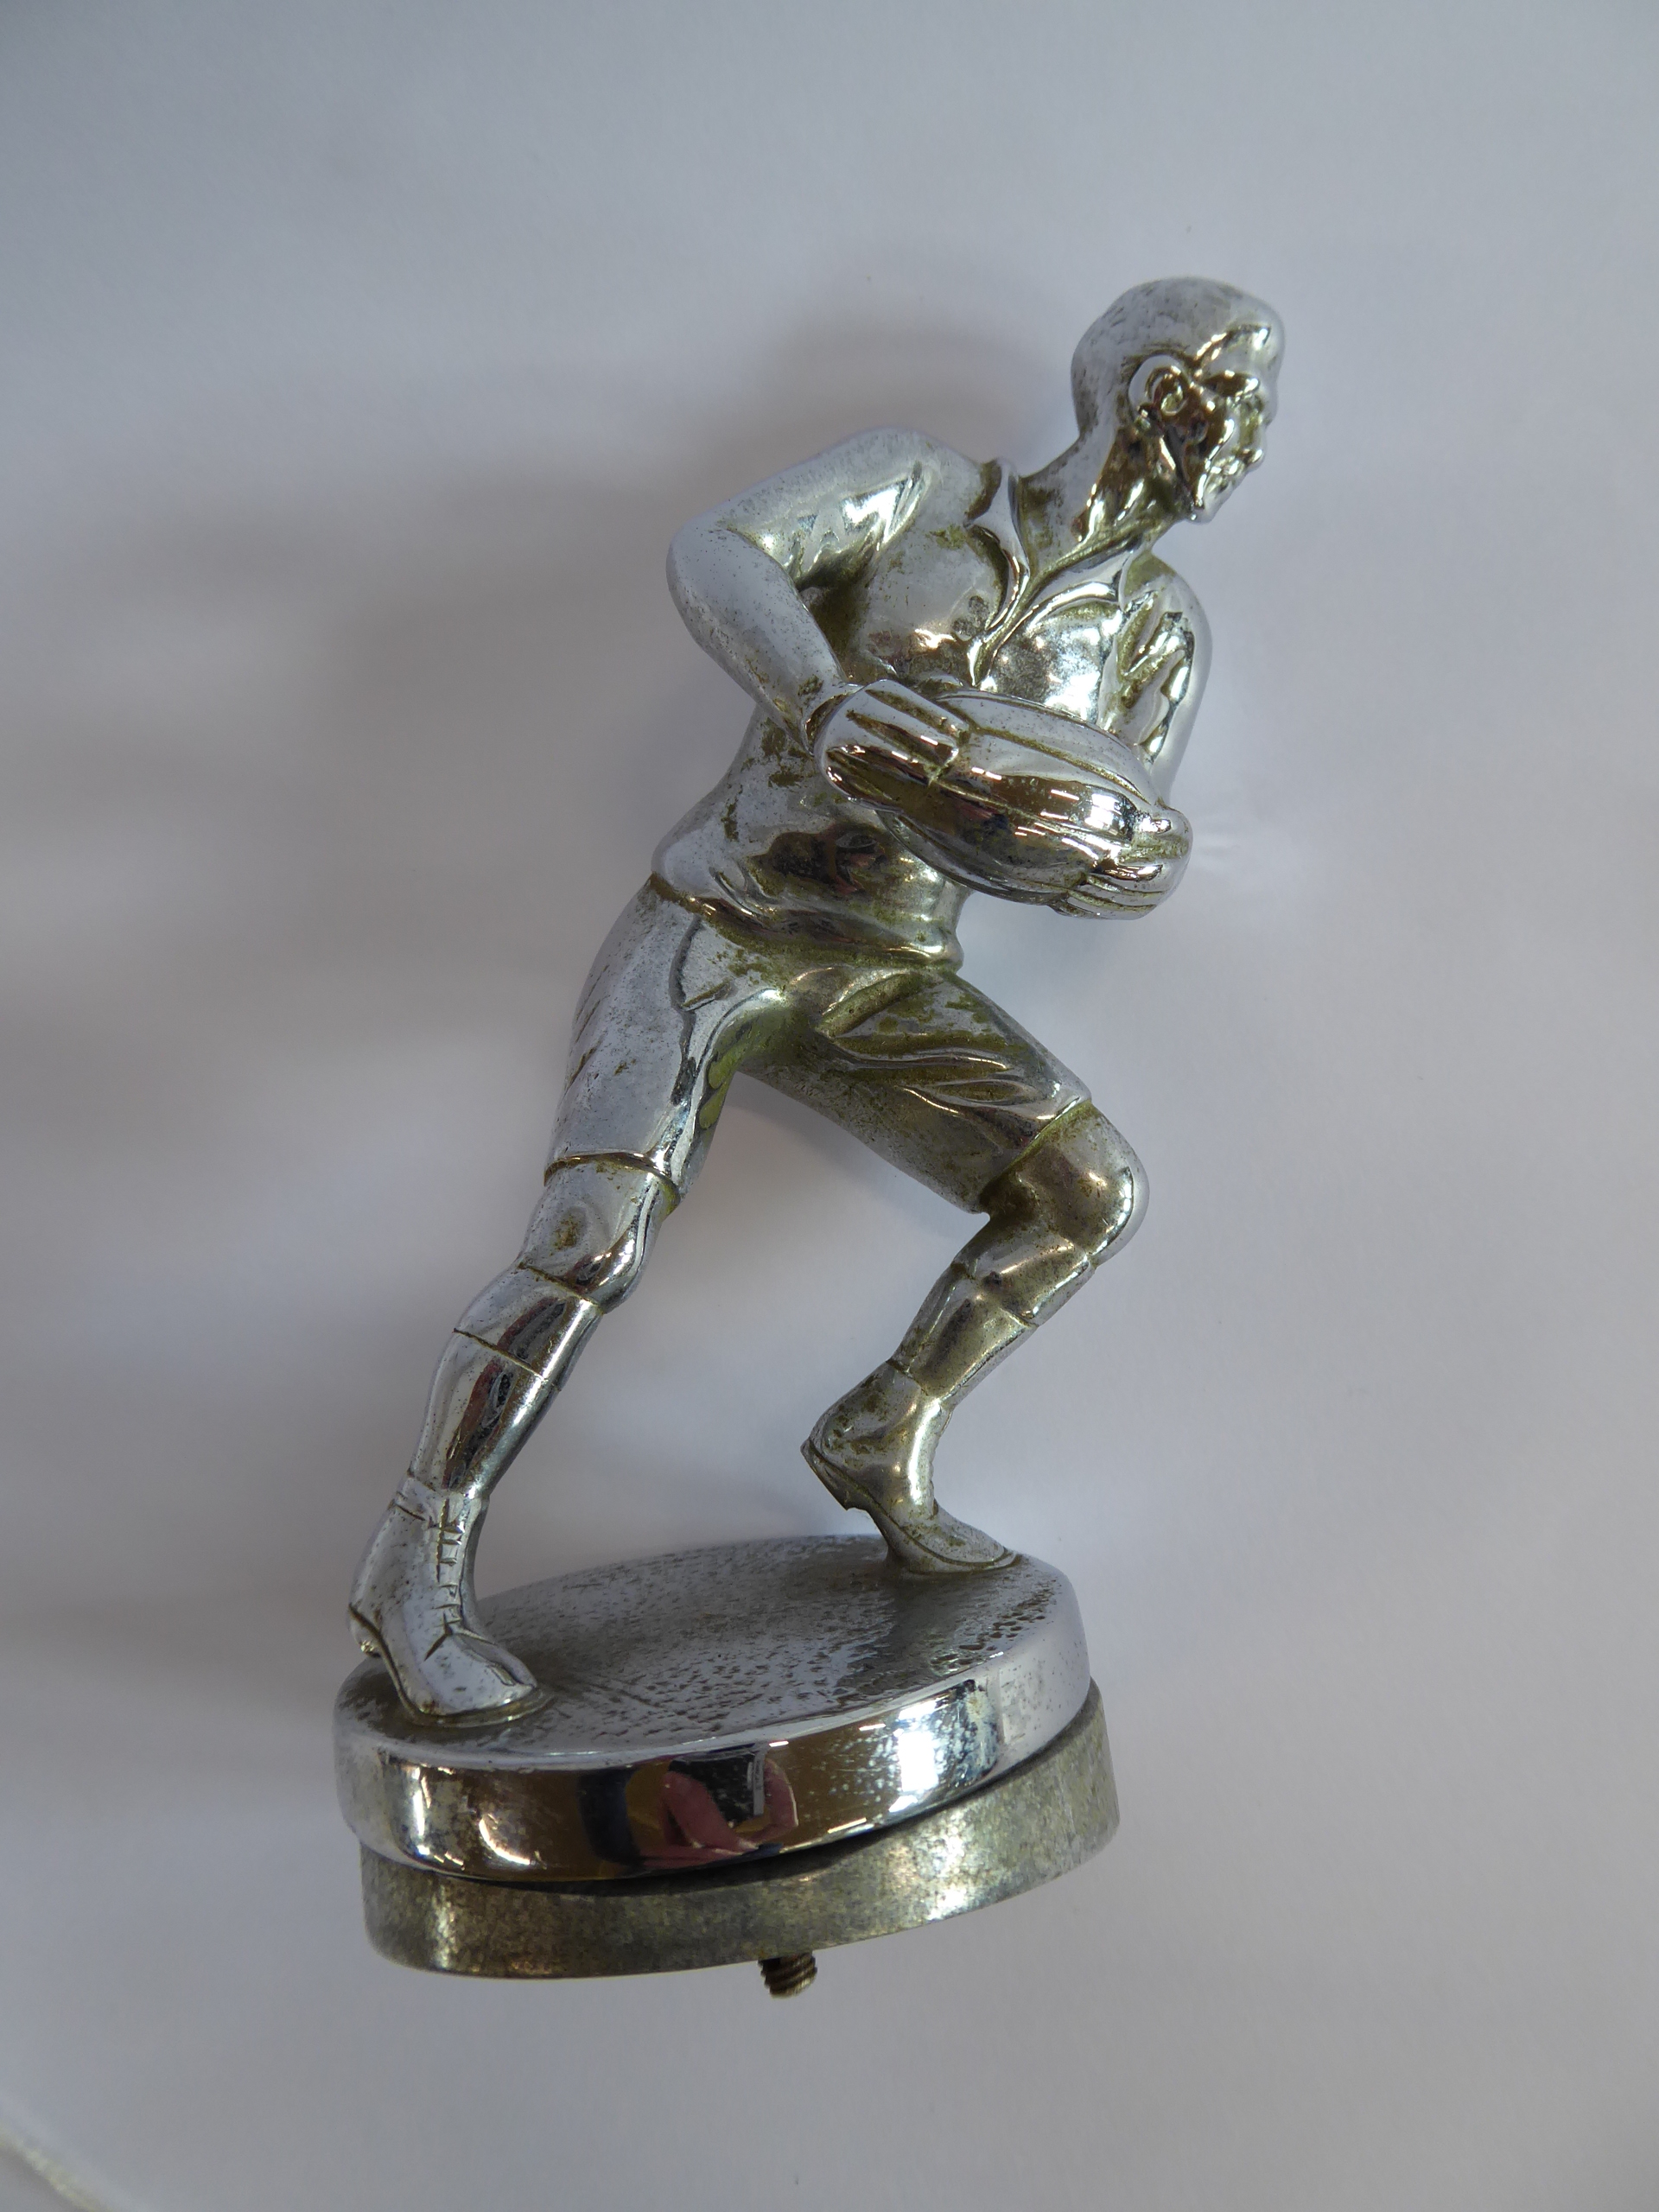 Chrome plated Rugby player mascot (5")